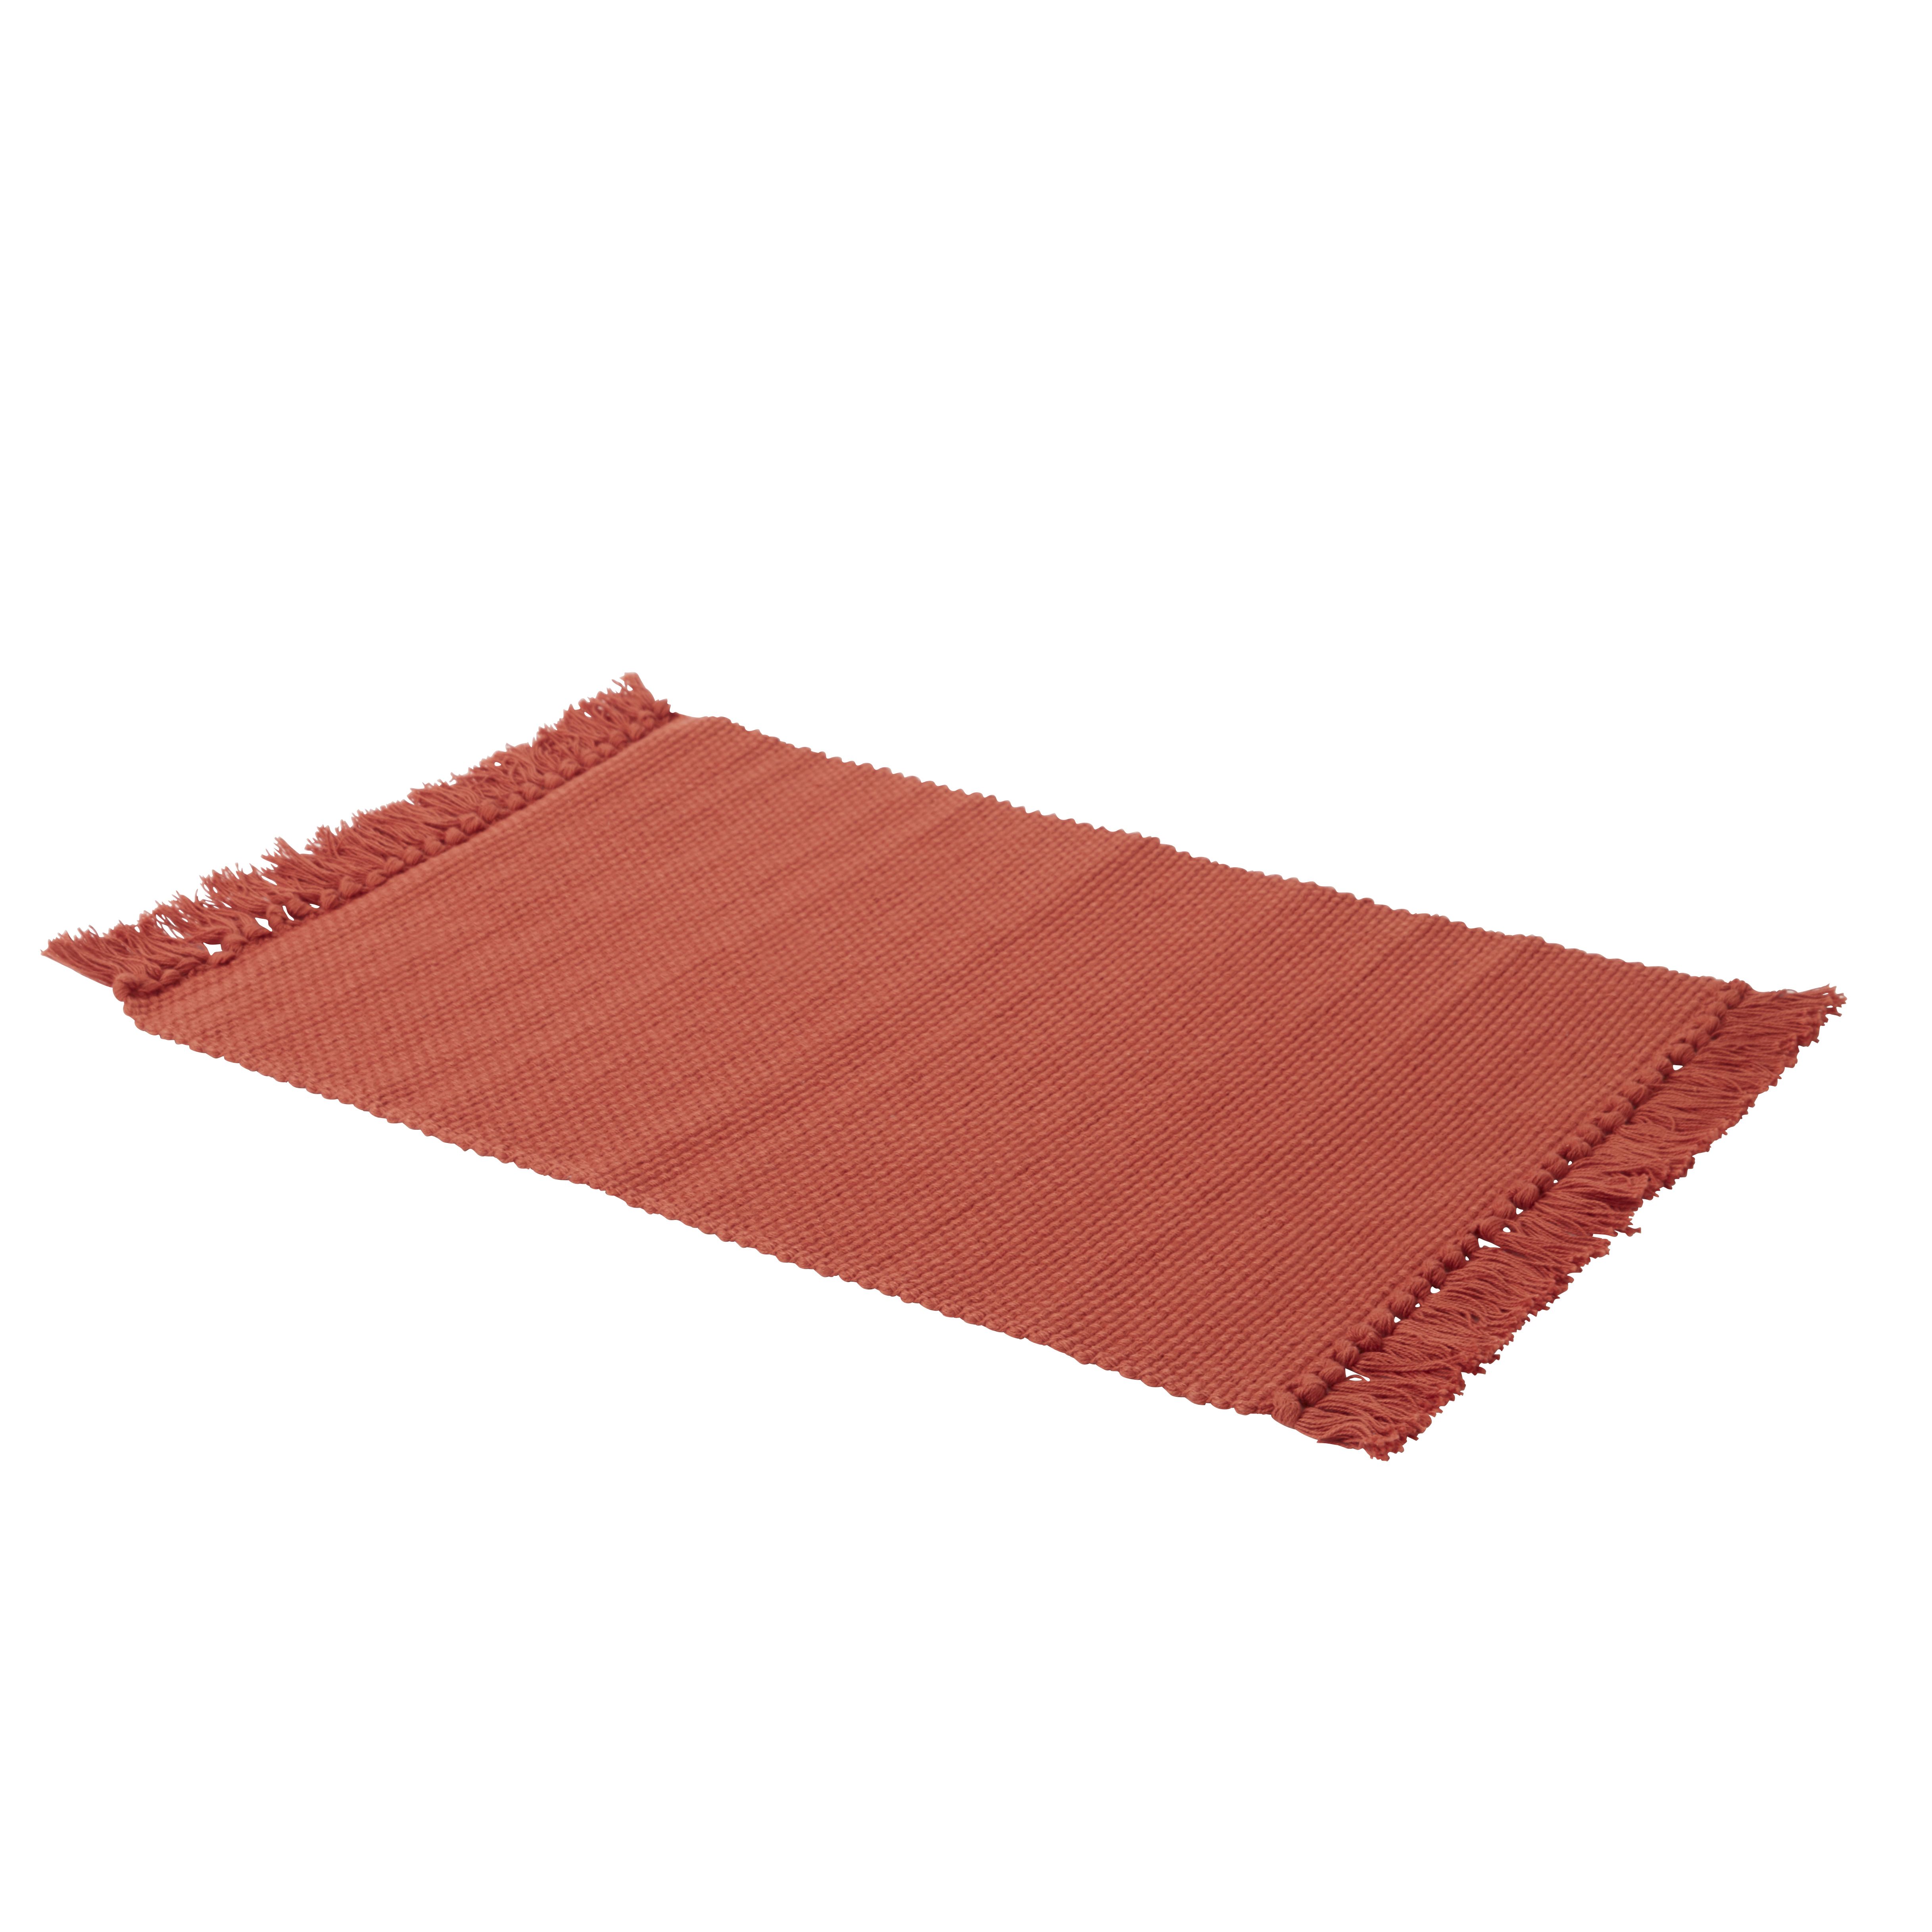 Blooma Mango Placemats, Pack of 2